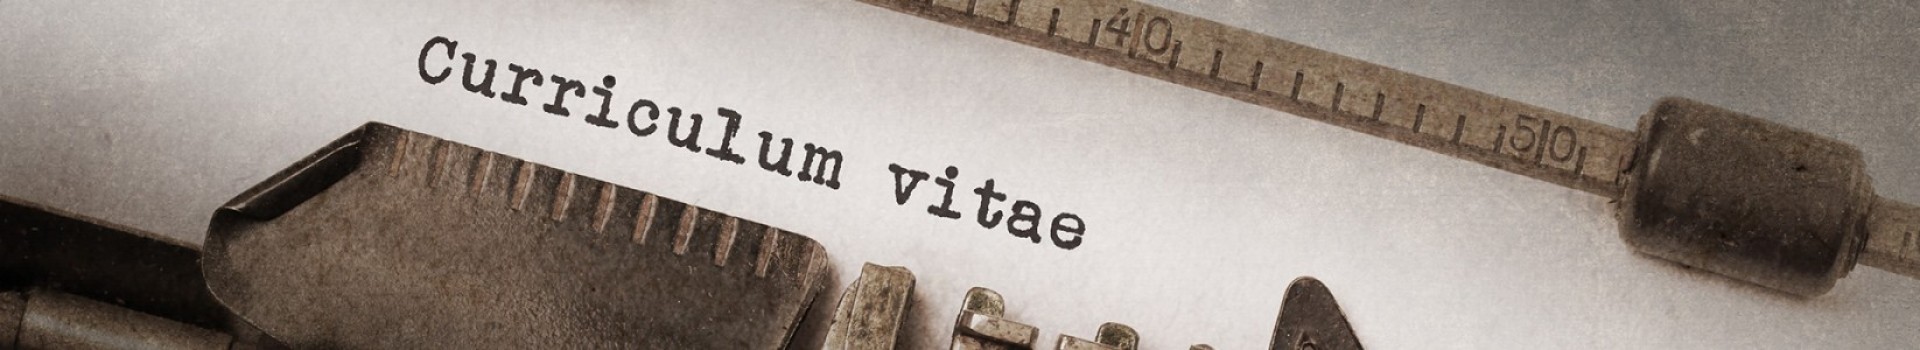 The words 'Curriculum Vitae' appear on paper in an old typewriter.